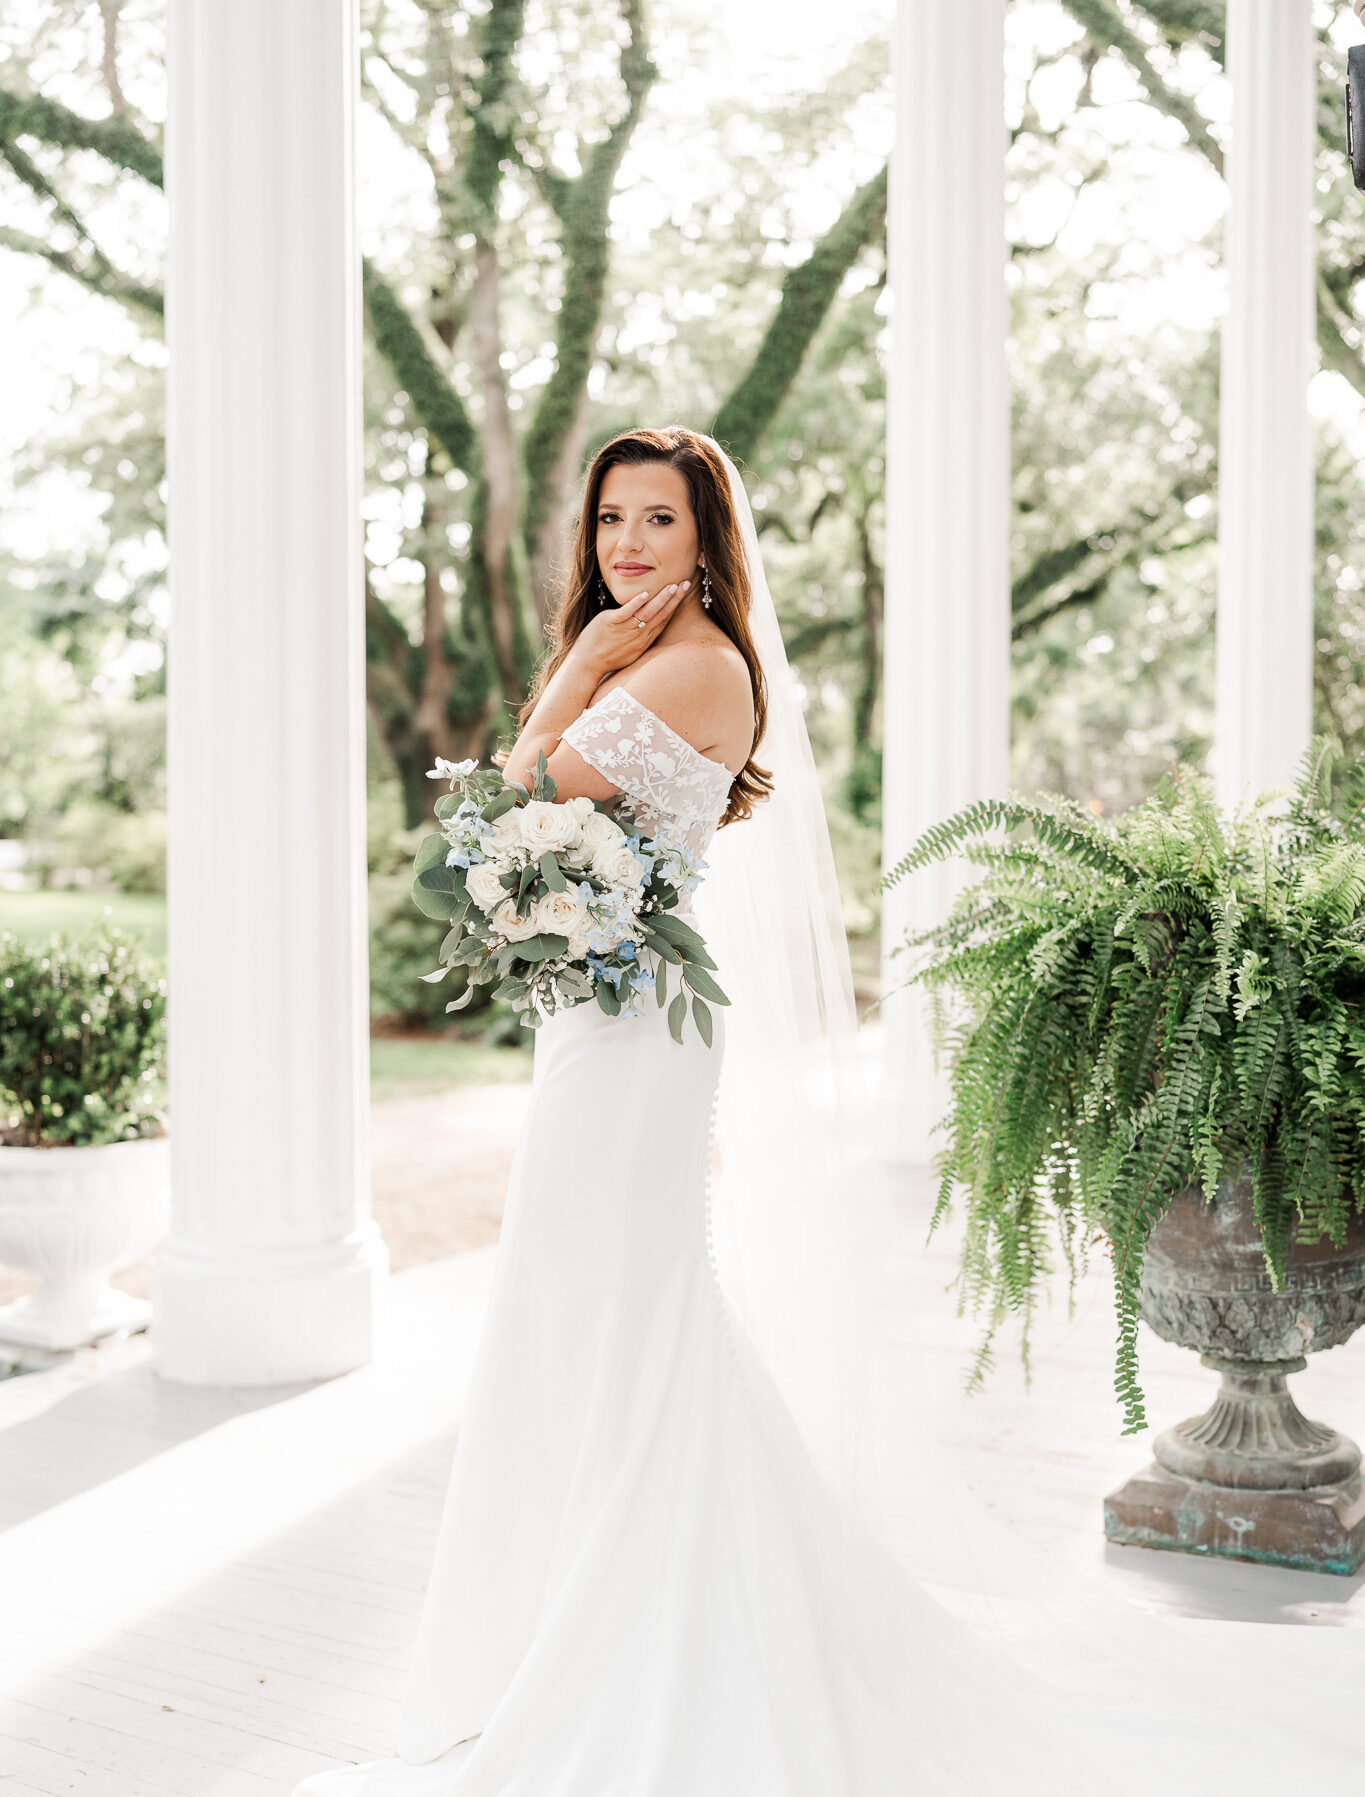 Amanda poses for her Bragg-Mitchell Mansion bridal photos on the front porch with large white columns in the background